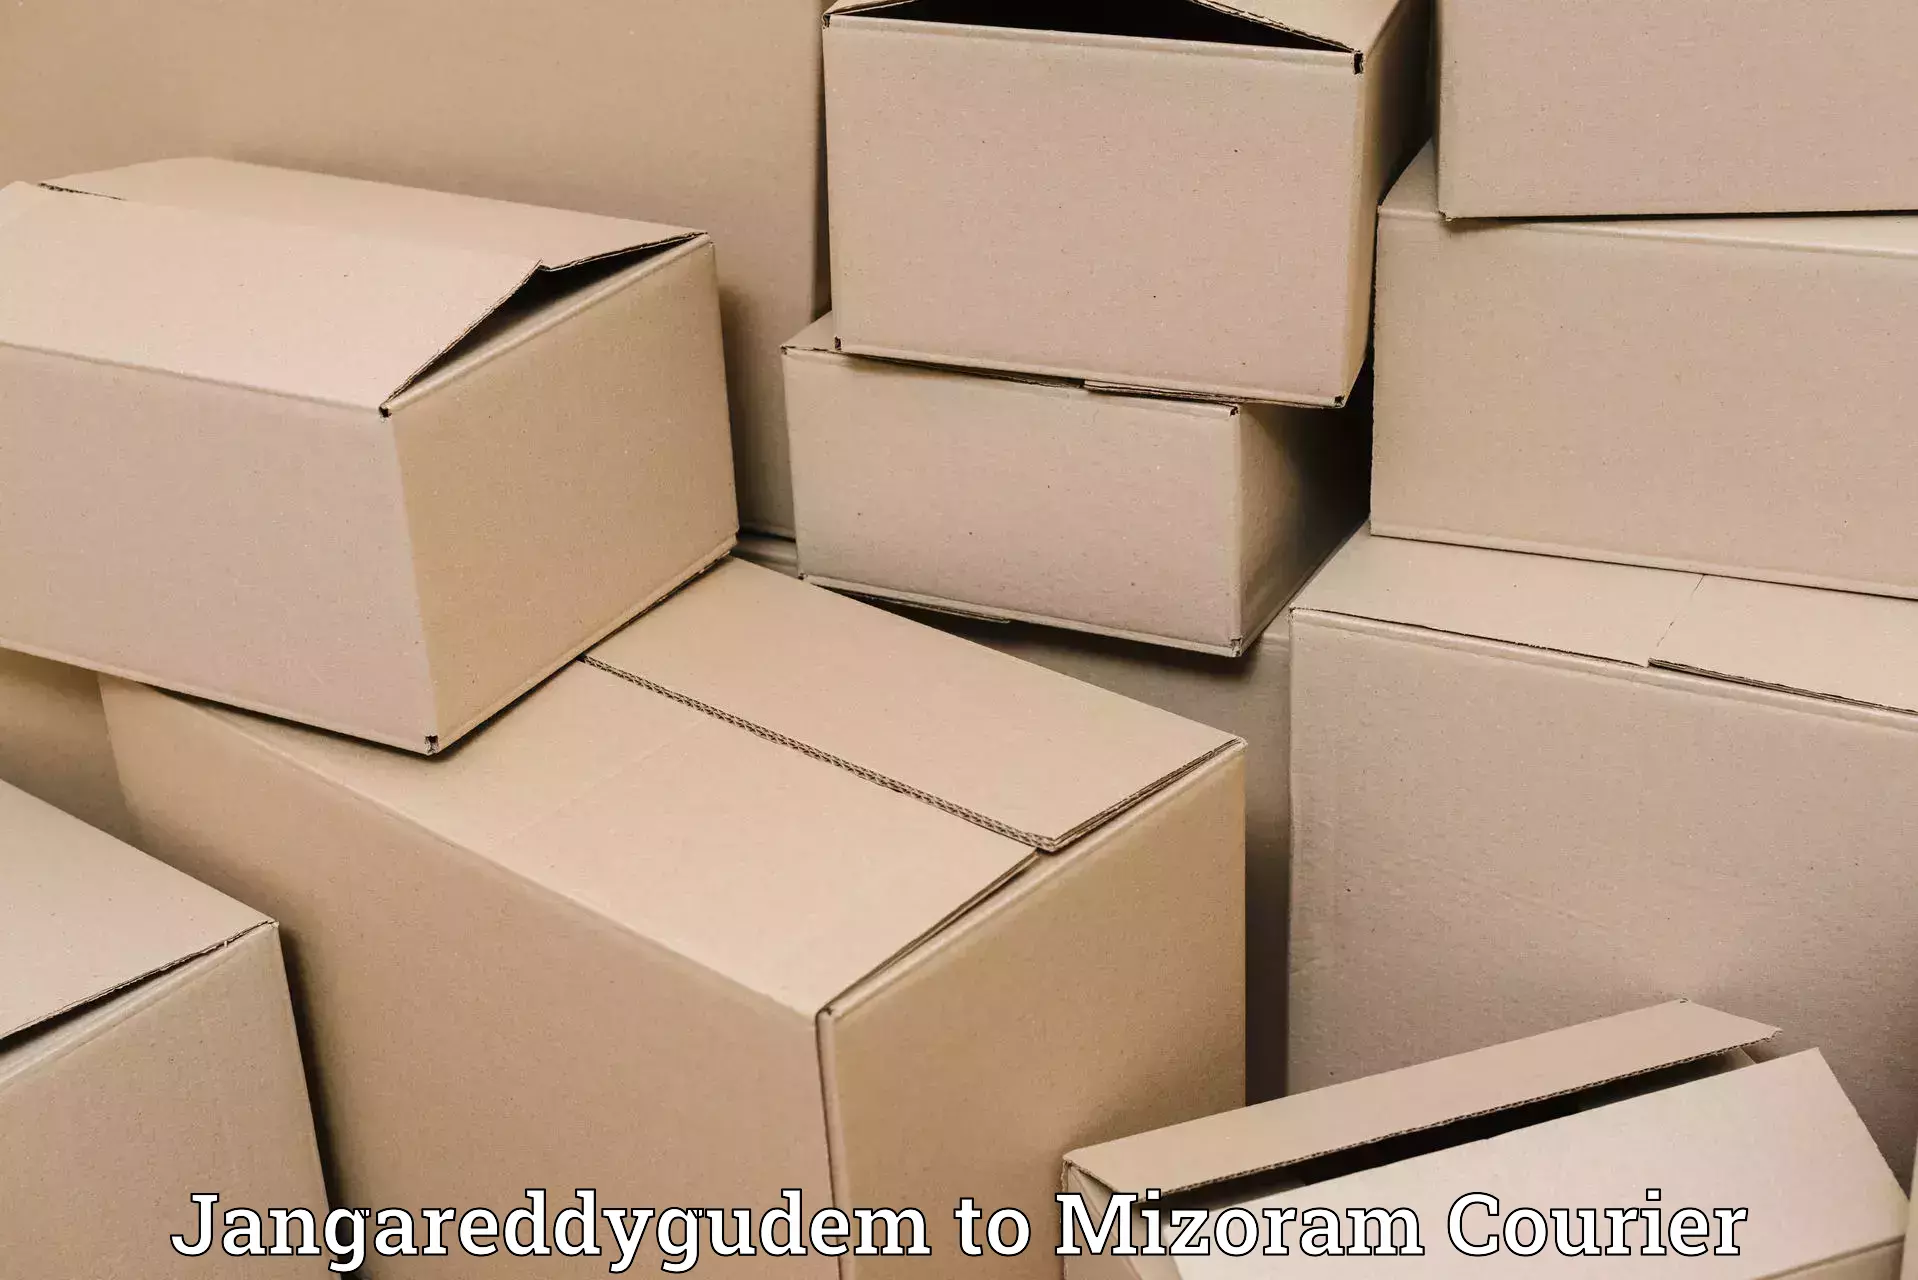 On-call courier service Jangareddygudem to Hnahthial